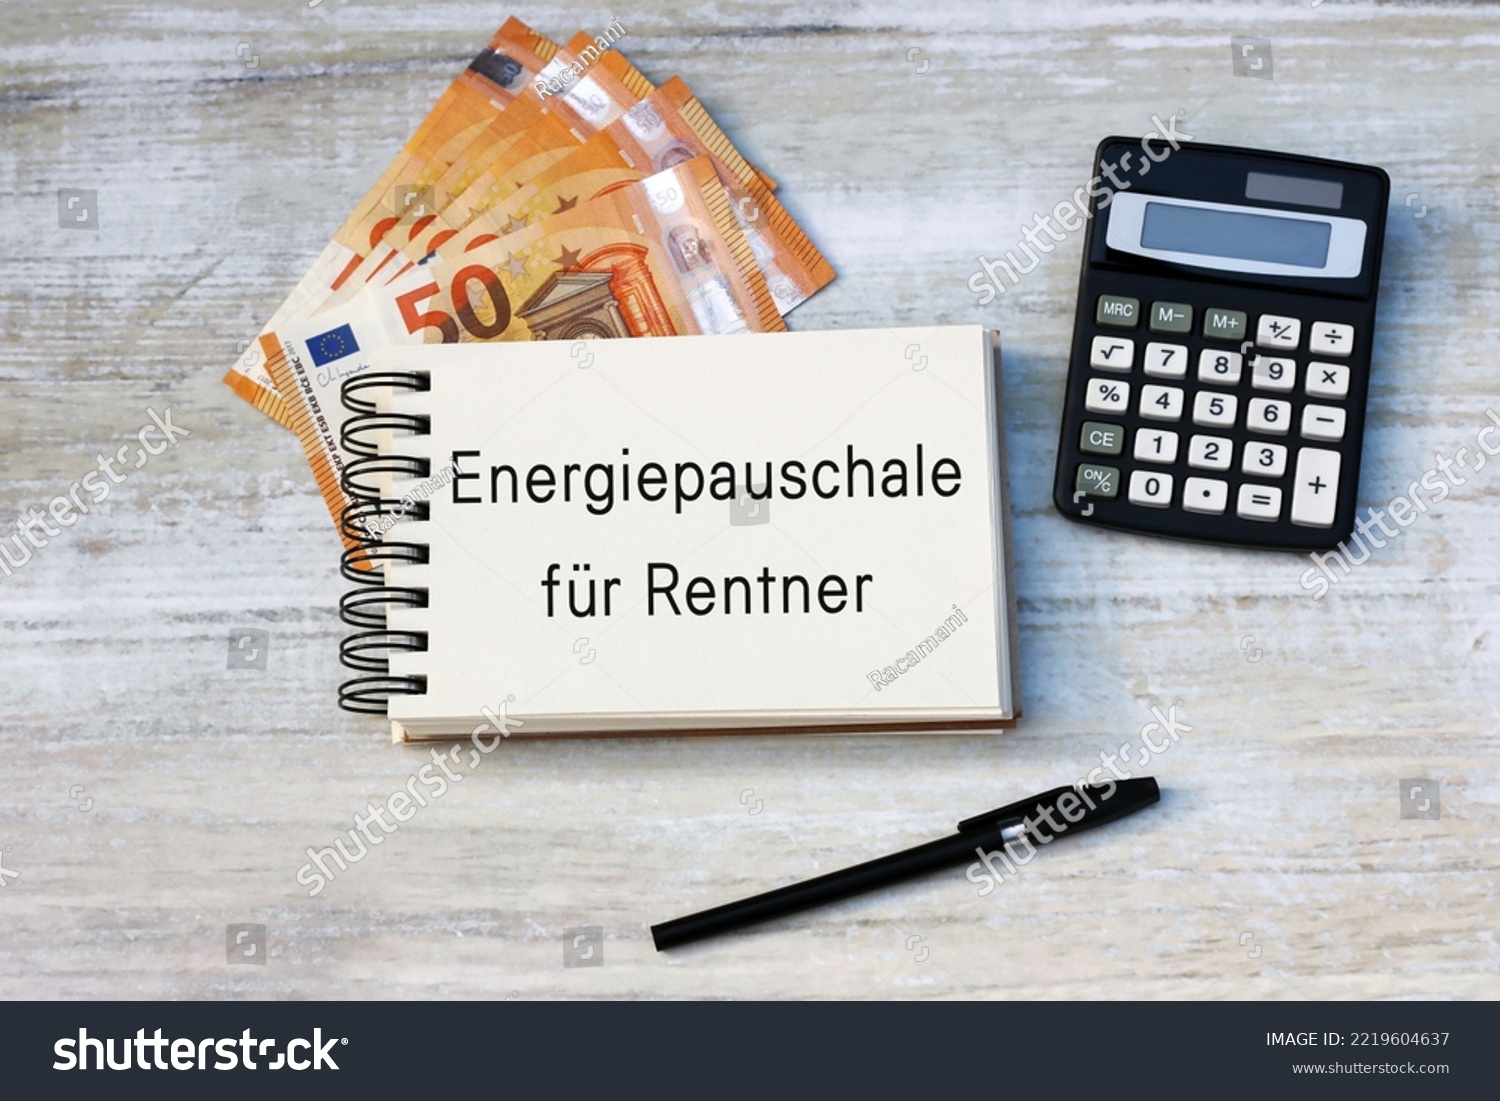 Notepad with the German text  Entlastungspaket für Rentner, German aid program during the energy crisis.
Entlastungspaket für Rentner translates to relief package for pensioners. #2219604637